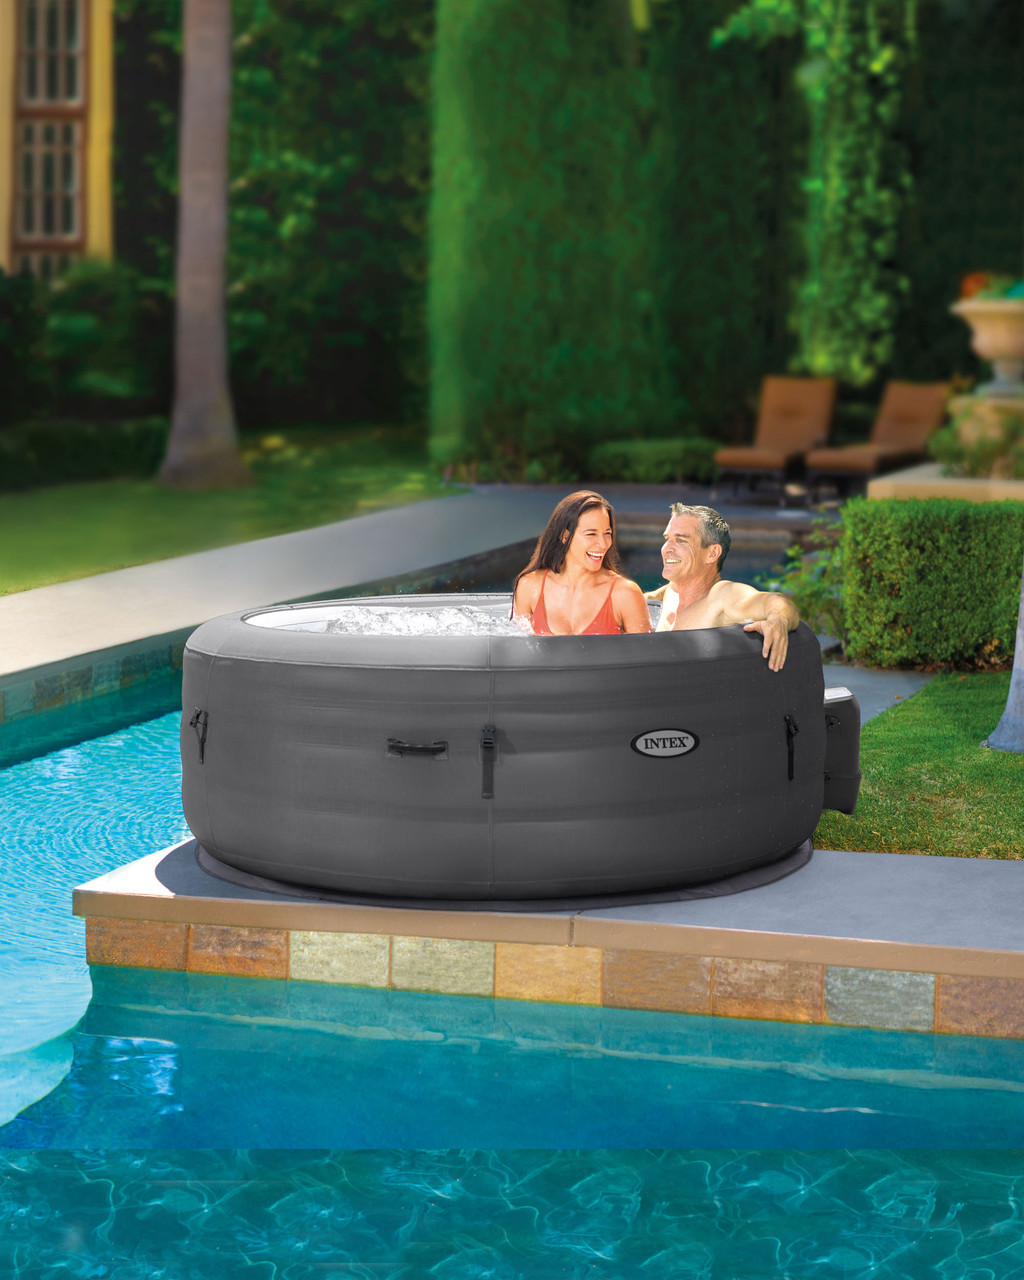 SPA GONFLABLE INTEX ENERGIE 4 PLACES